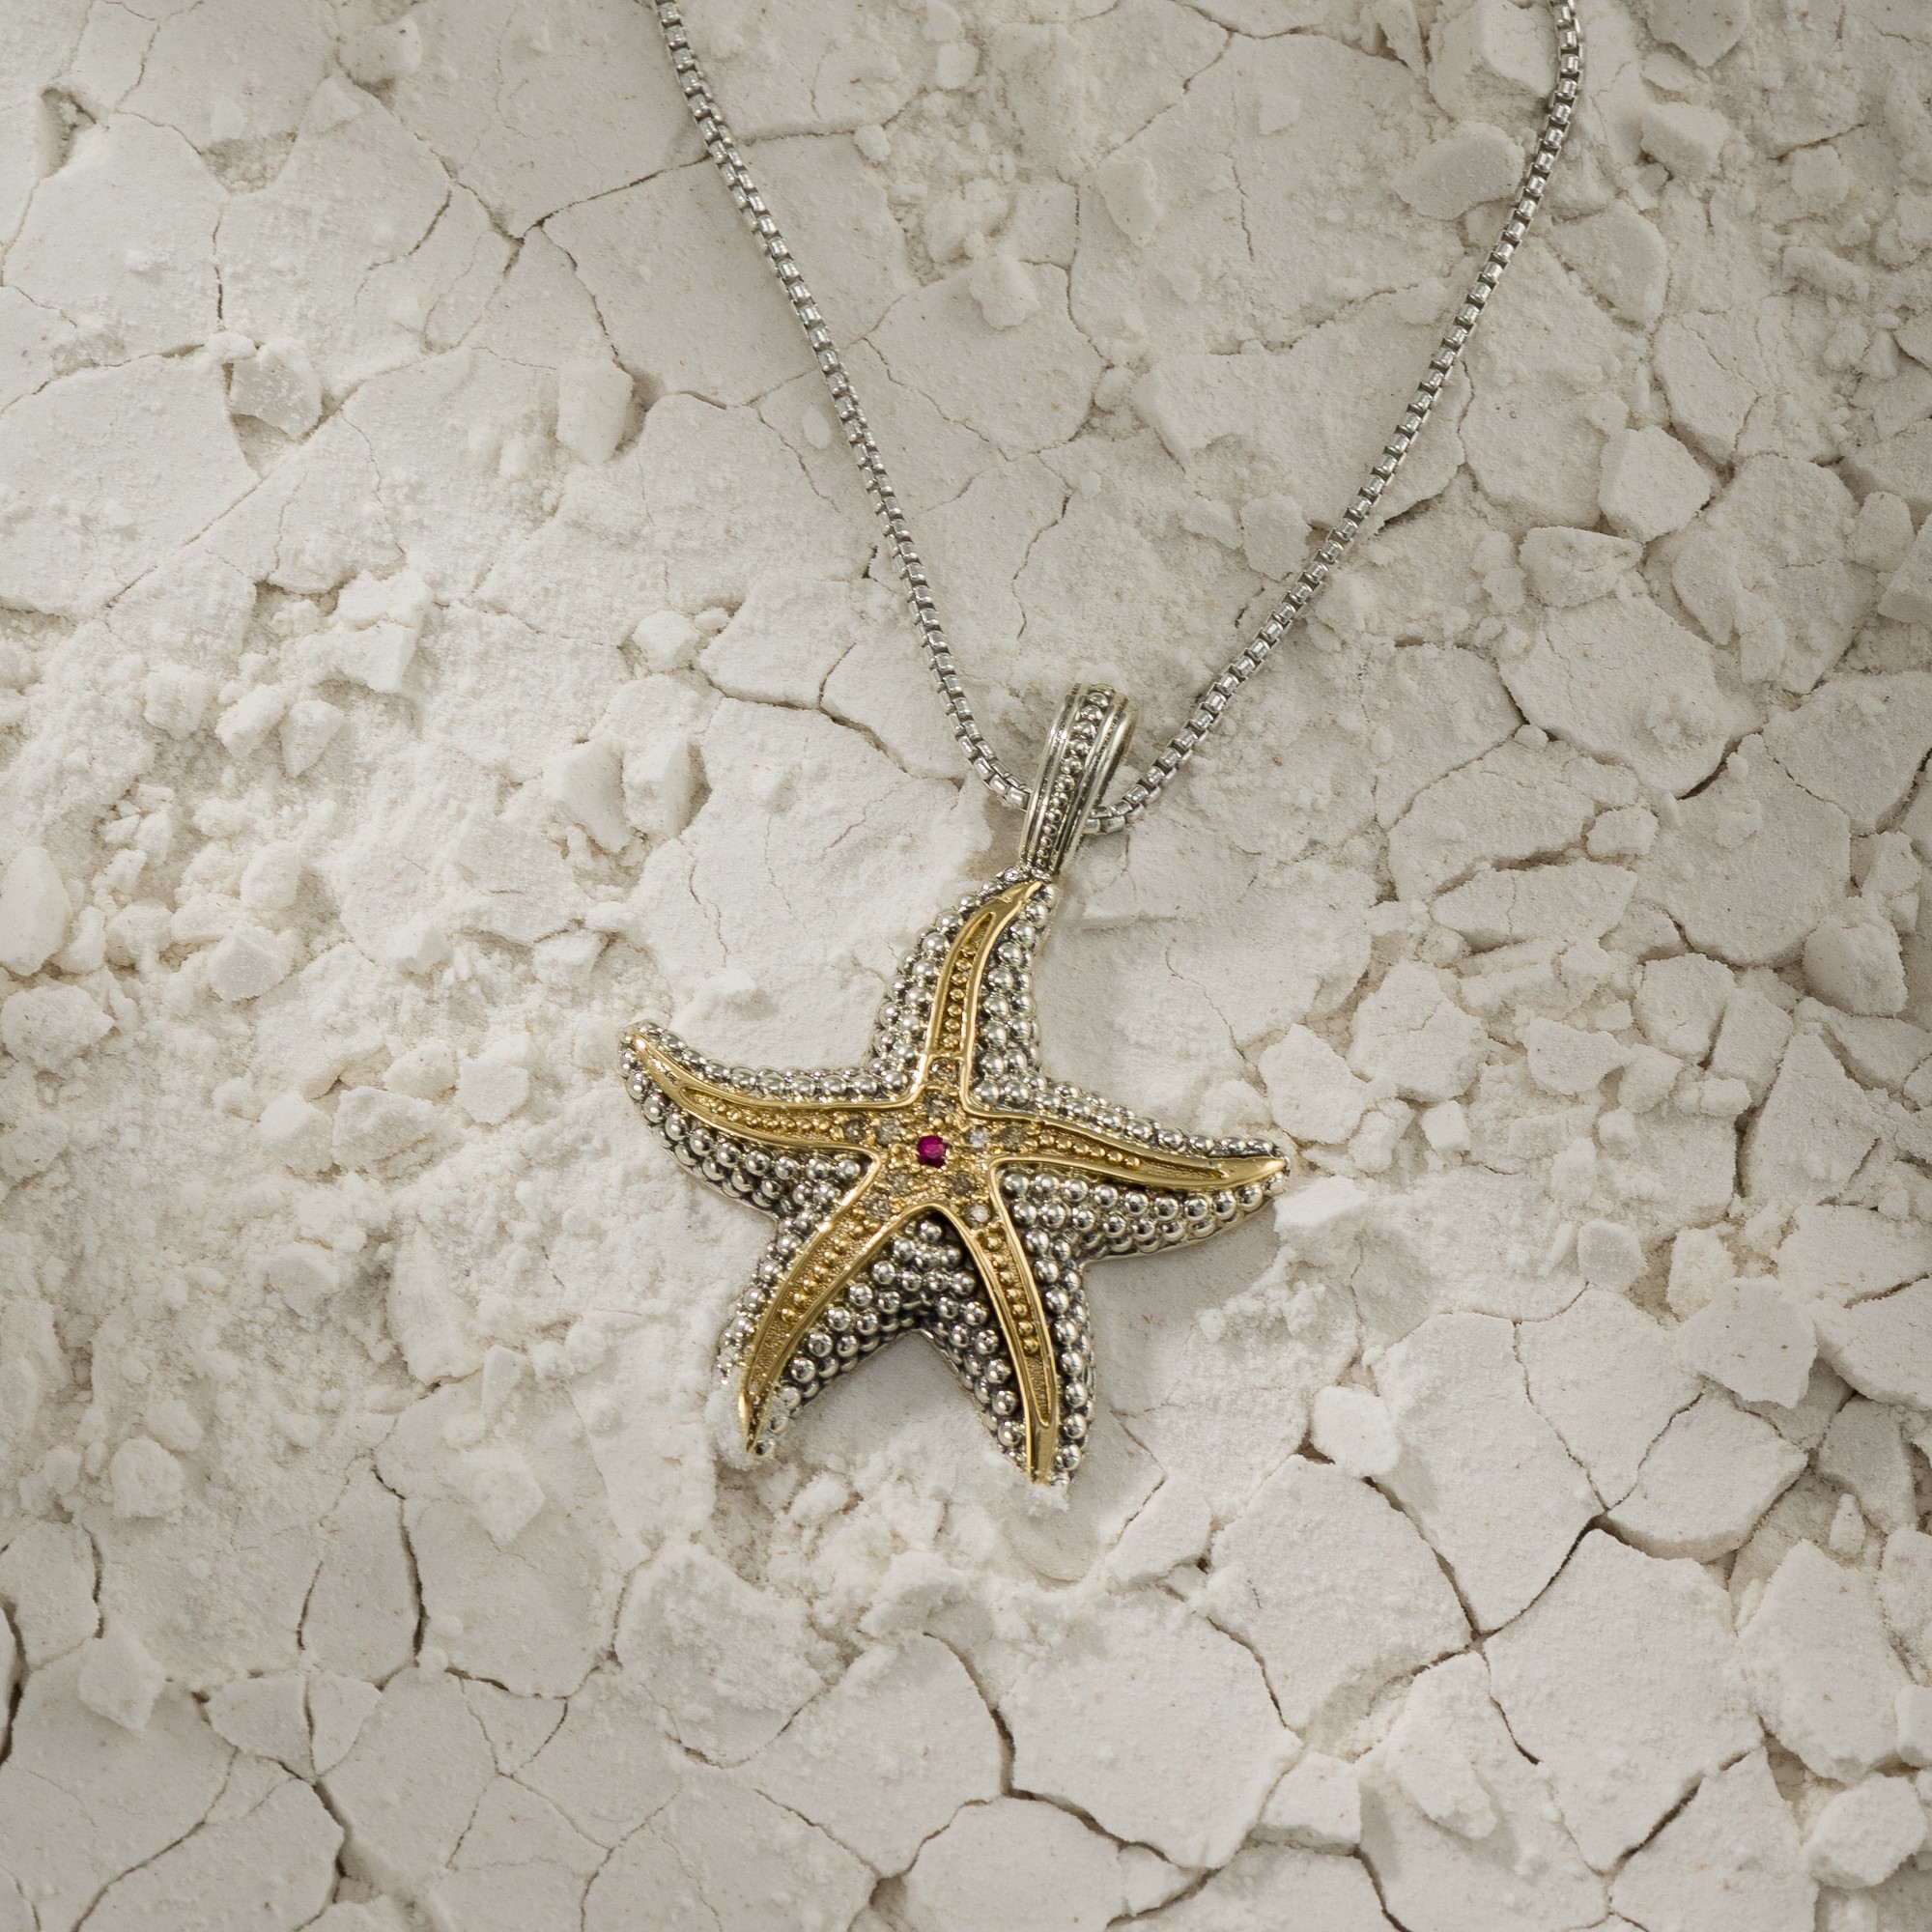 Starfish Pendant in 18K solid Yellow Gold and Sterling Silver with Precious stones